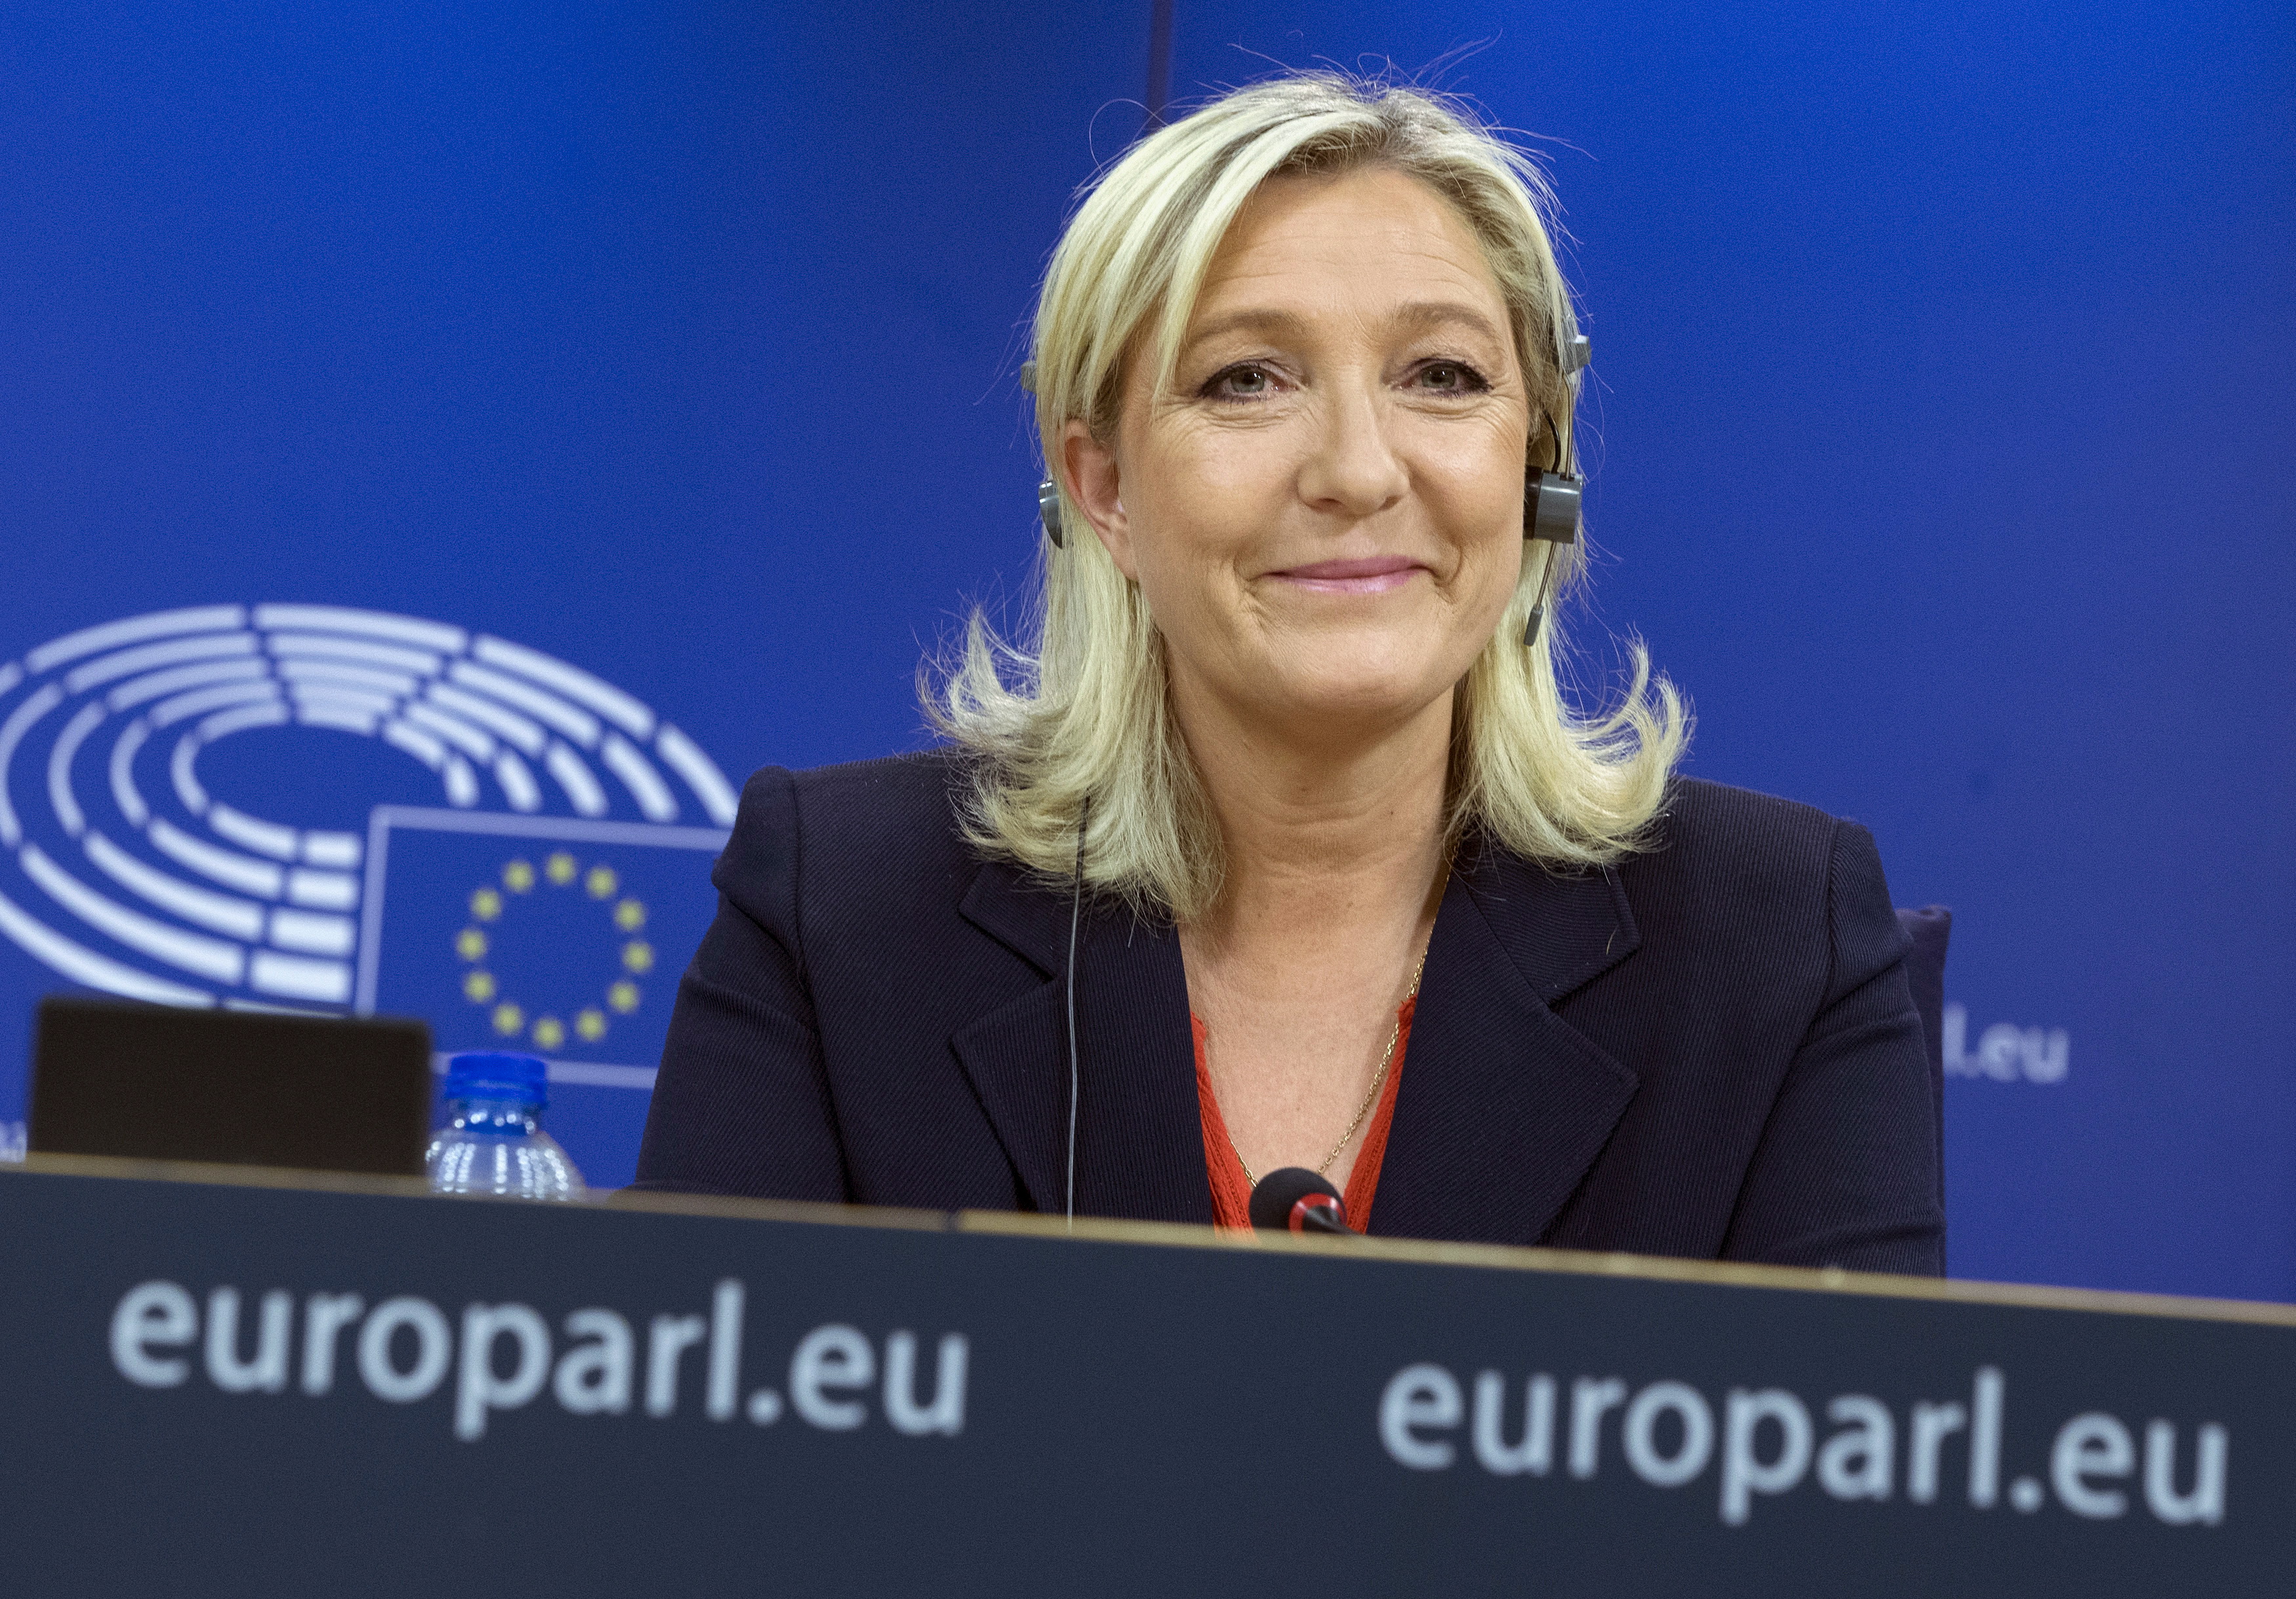 Marine Le Pen, France's National Front political party head, attends a joint news conference at the European Parliament in Brussels, Belgium, June 16, 2015. (Yves Herman—Reuters)